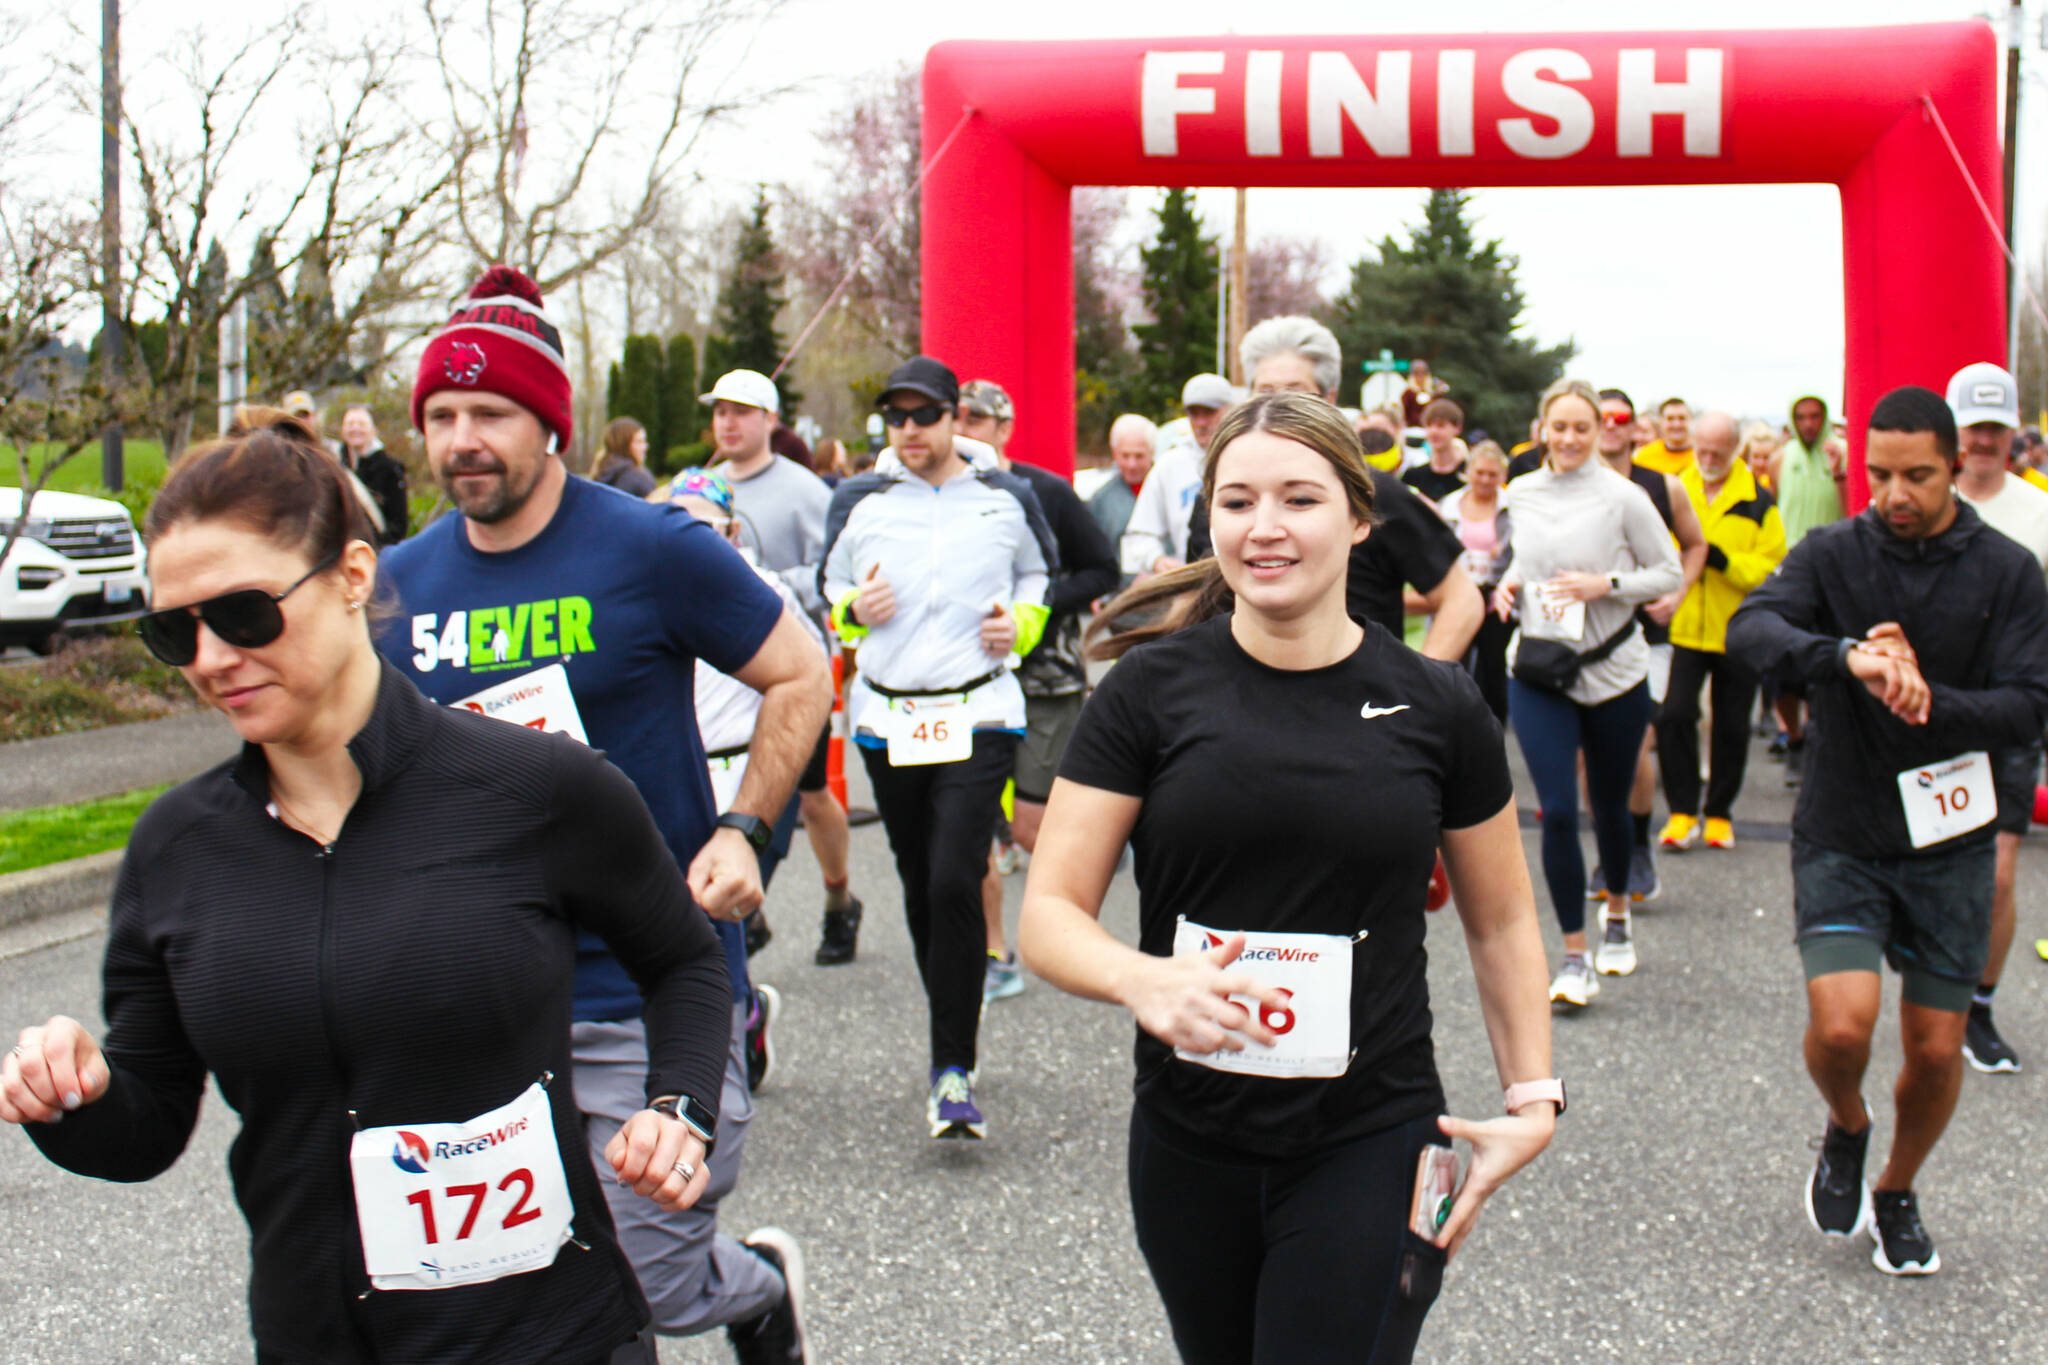 Last year was the Enumclaw Chamber of Commerce’s inaugural Rainier Run 5K, which is coming again on April 13. After running the 5K, there will be a block party with a beer garden, kids activities, and more. Photos by Ray Miller-Still